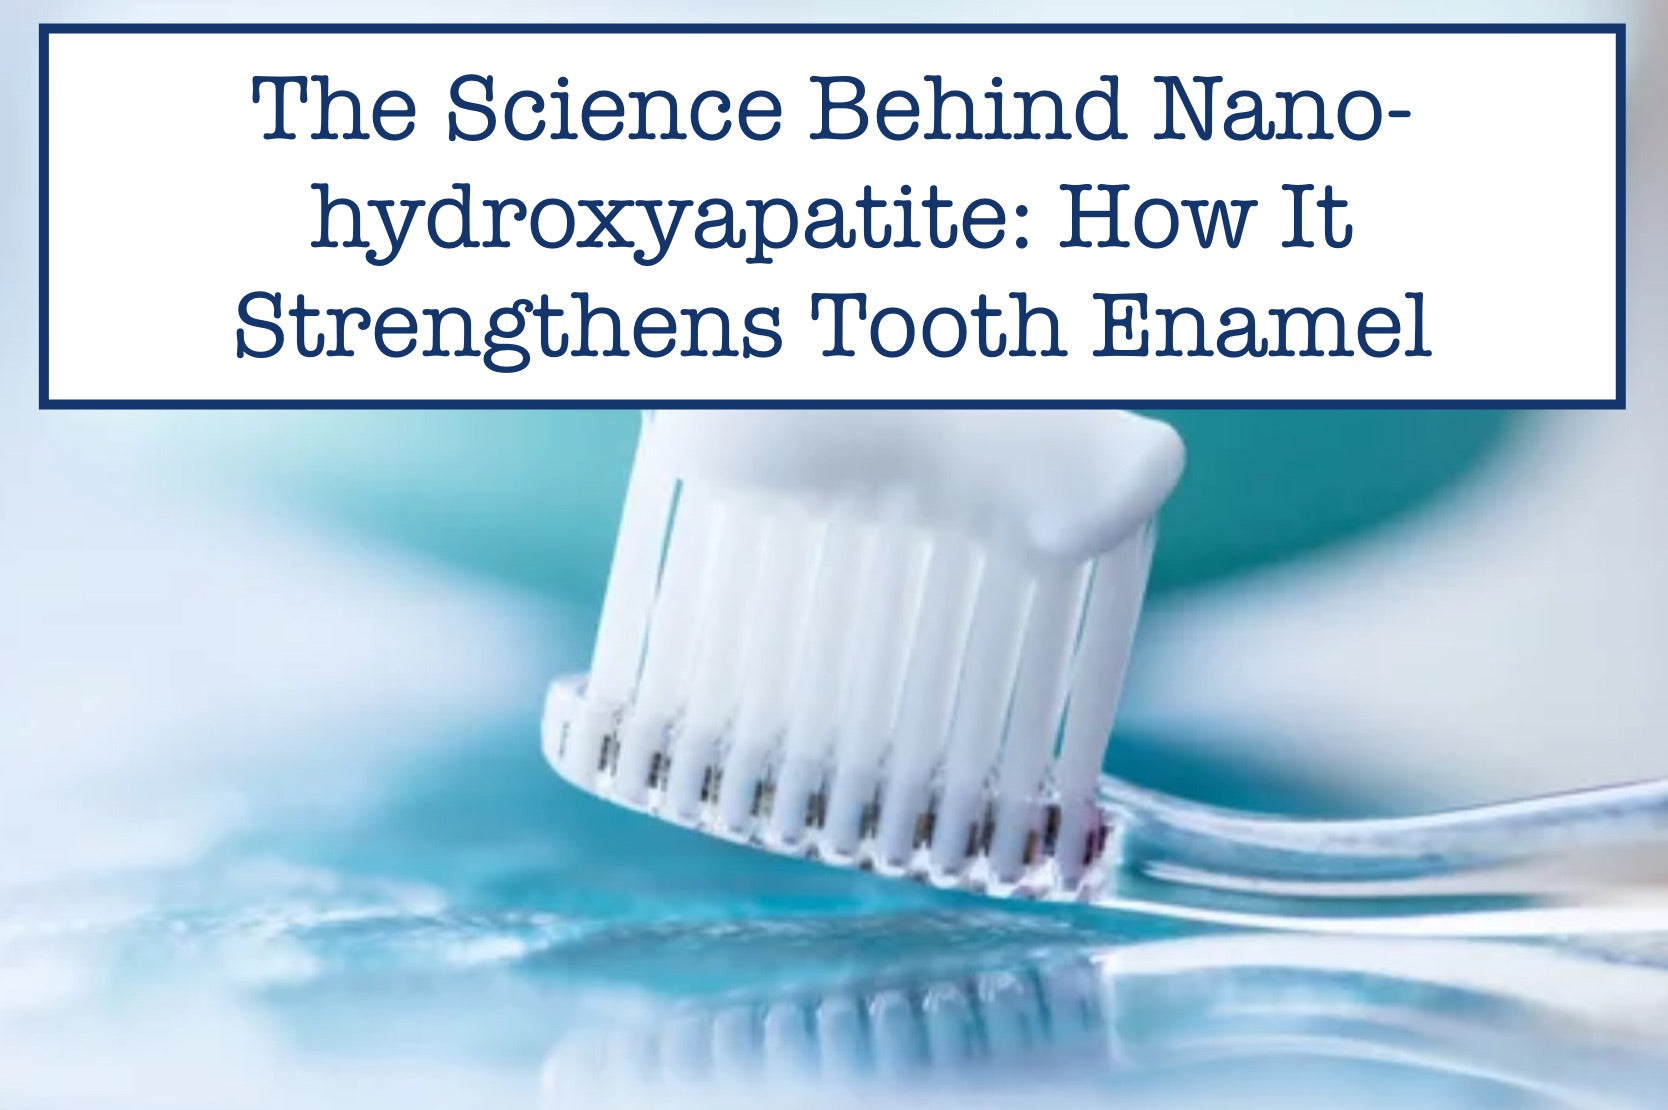 The Science Behind Nano-hydroxyapatite: How It Strengthens Tooth Enamel